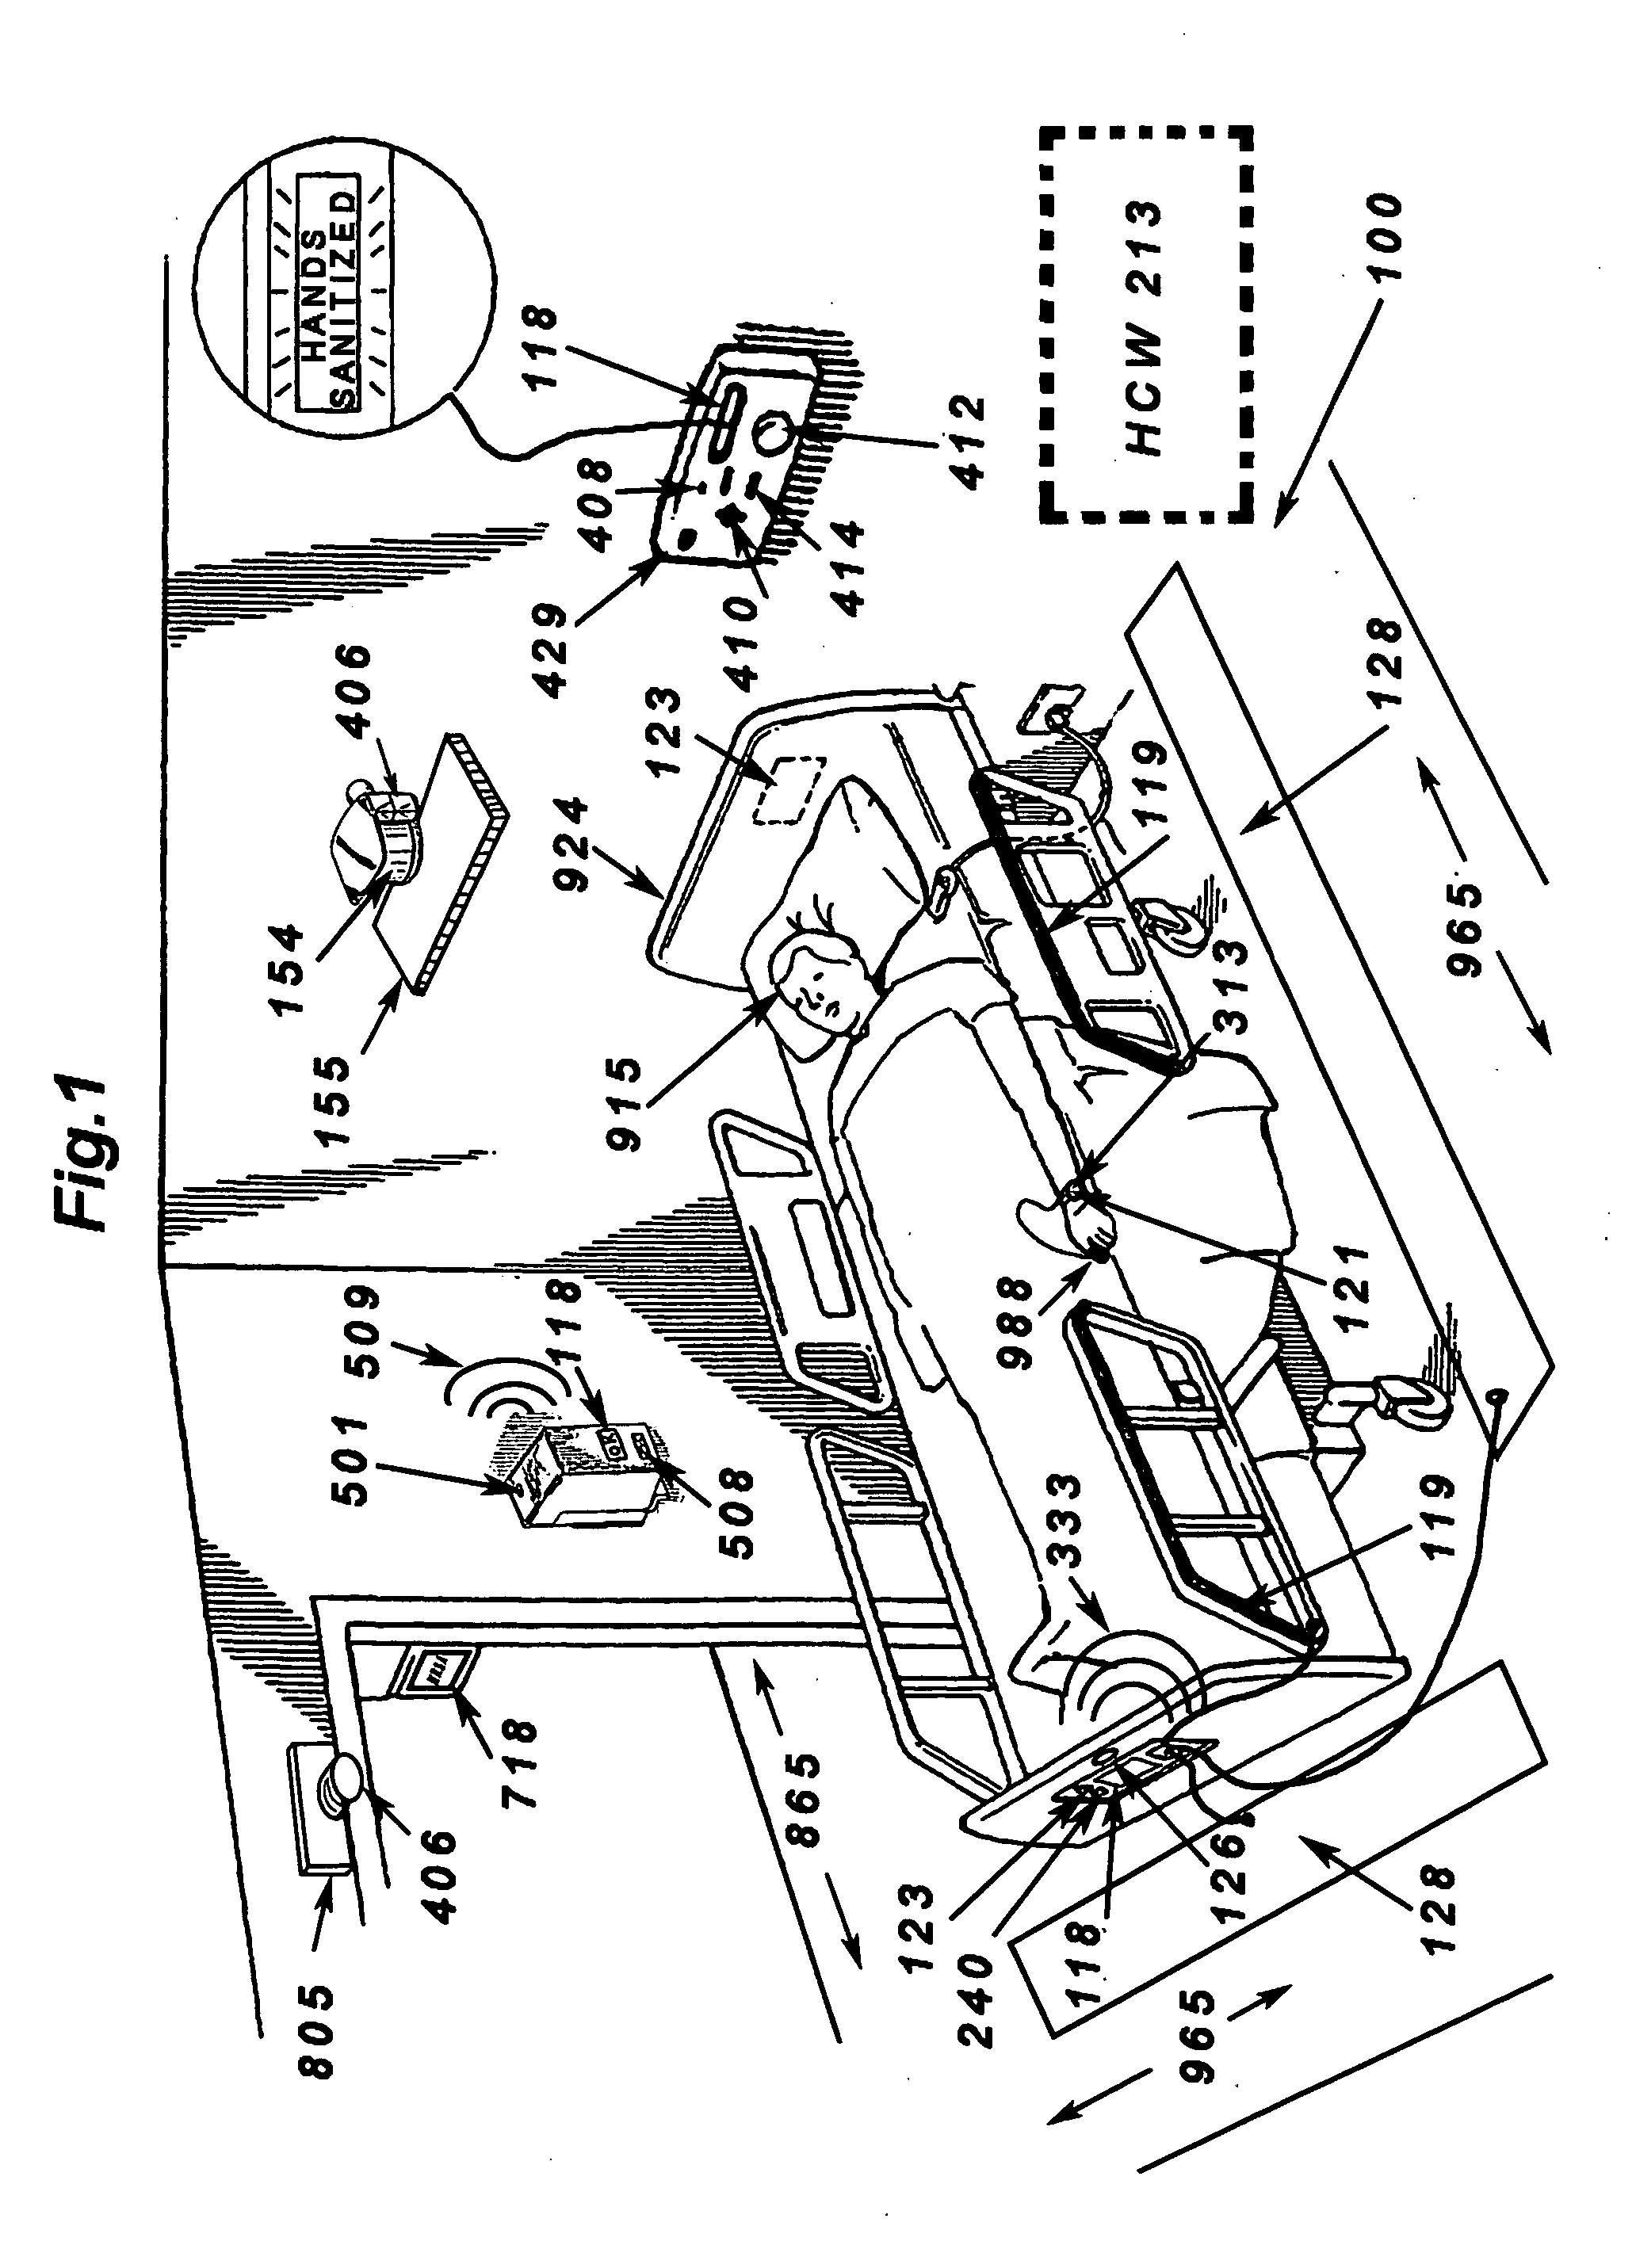 Systems and methods for monitoring health care workers and patients